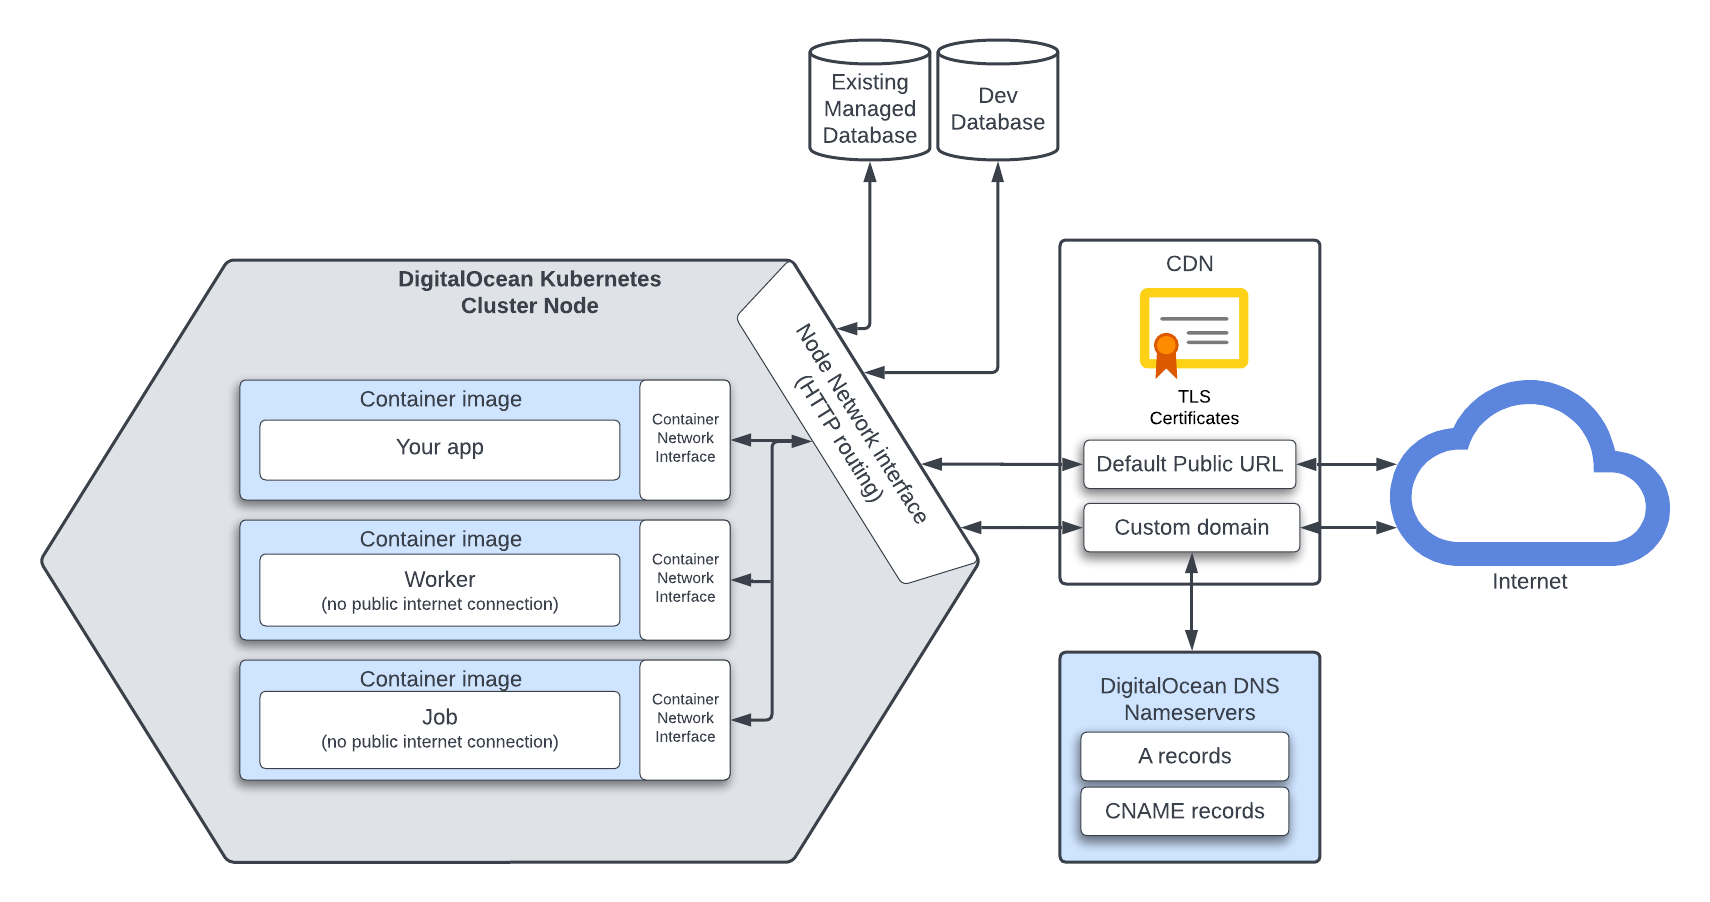 App infrastructure diagram that displays an app in a Kubernetes cluster node, its DNS record stored on DigitalOcean DNS, and its TLS certificates stored in a CDN.